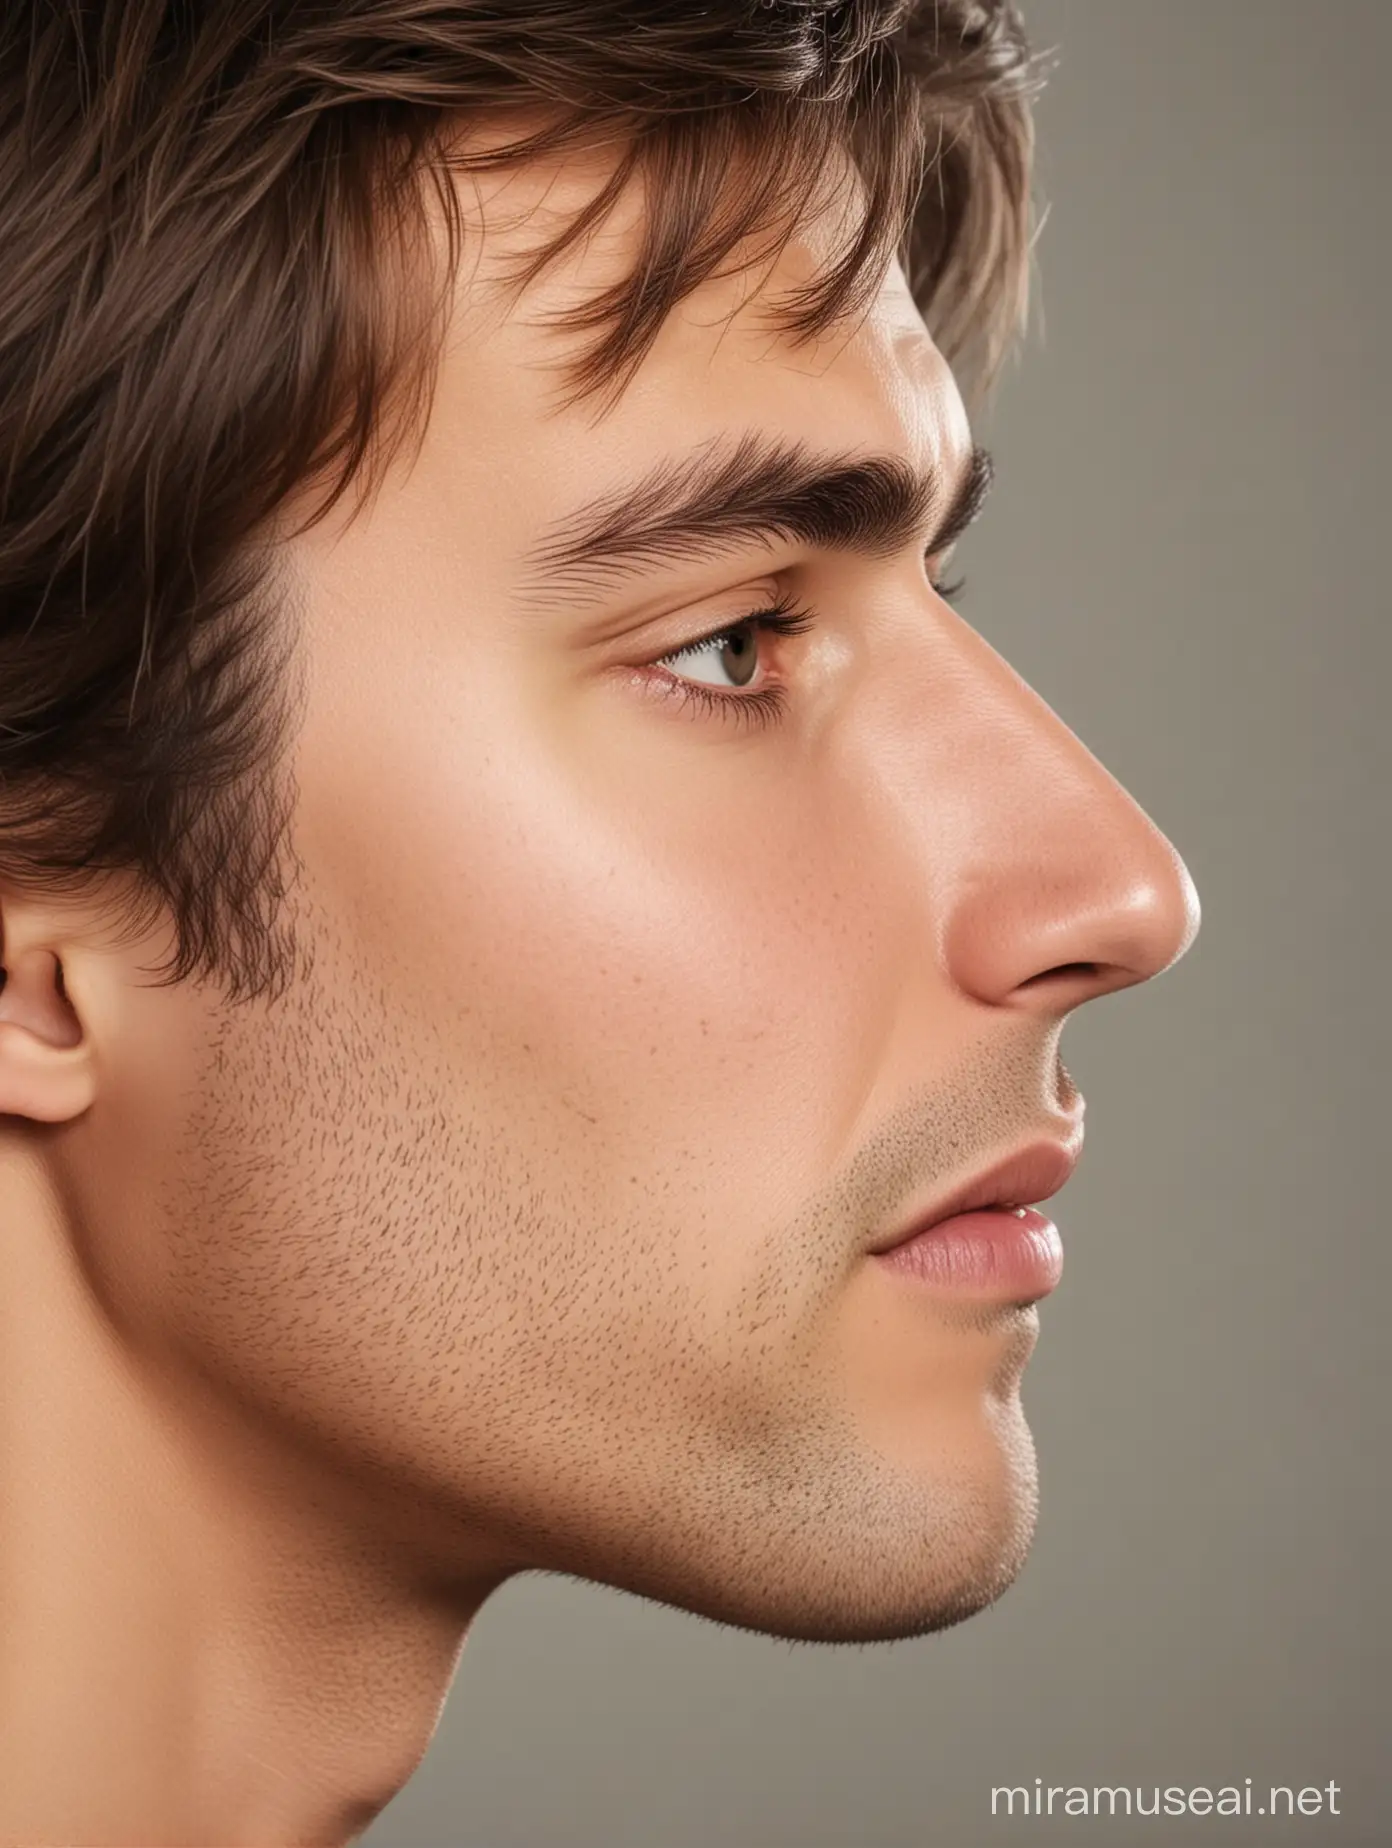 Woman Gazing at Man with Unique Jawline